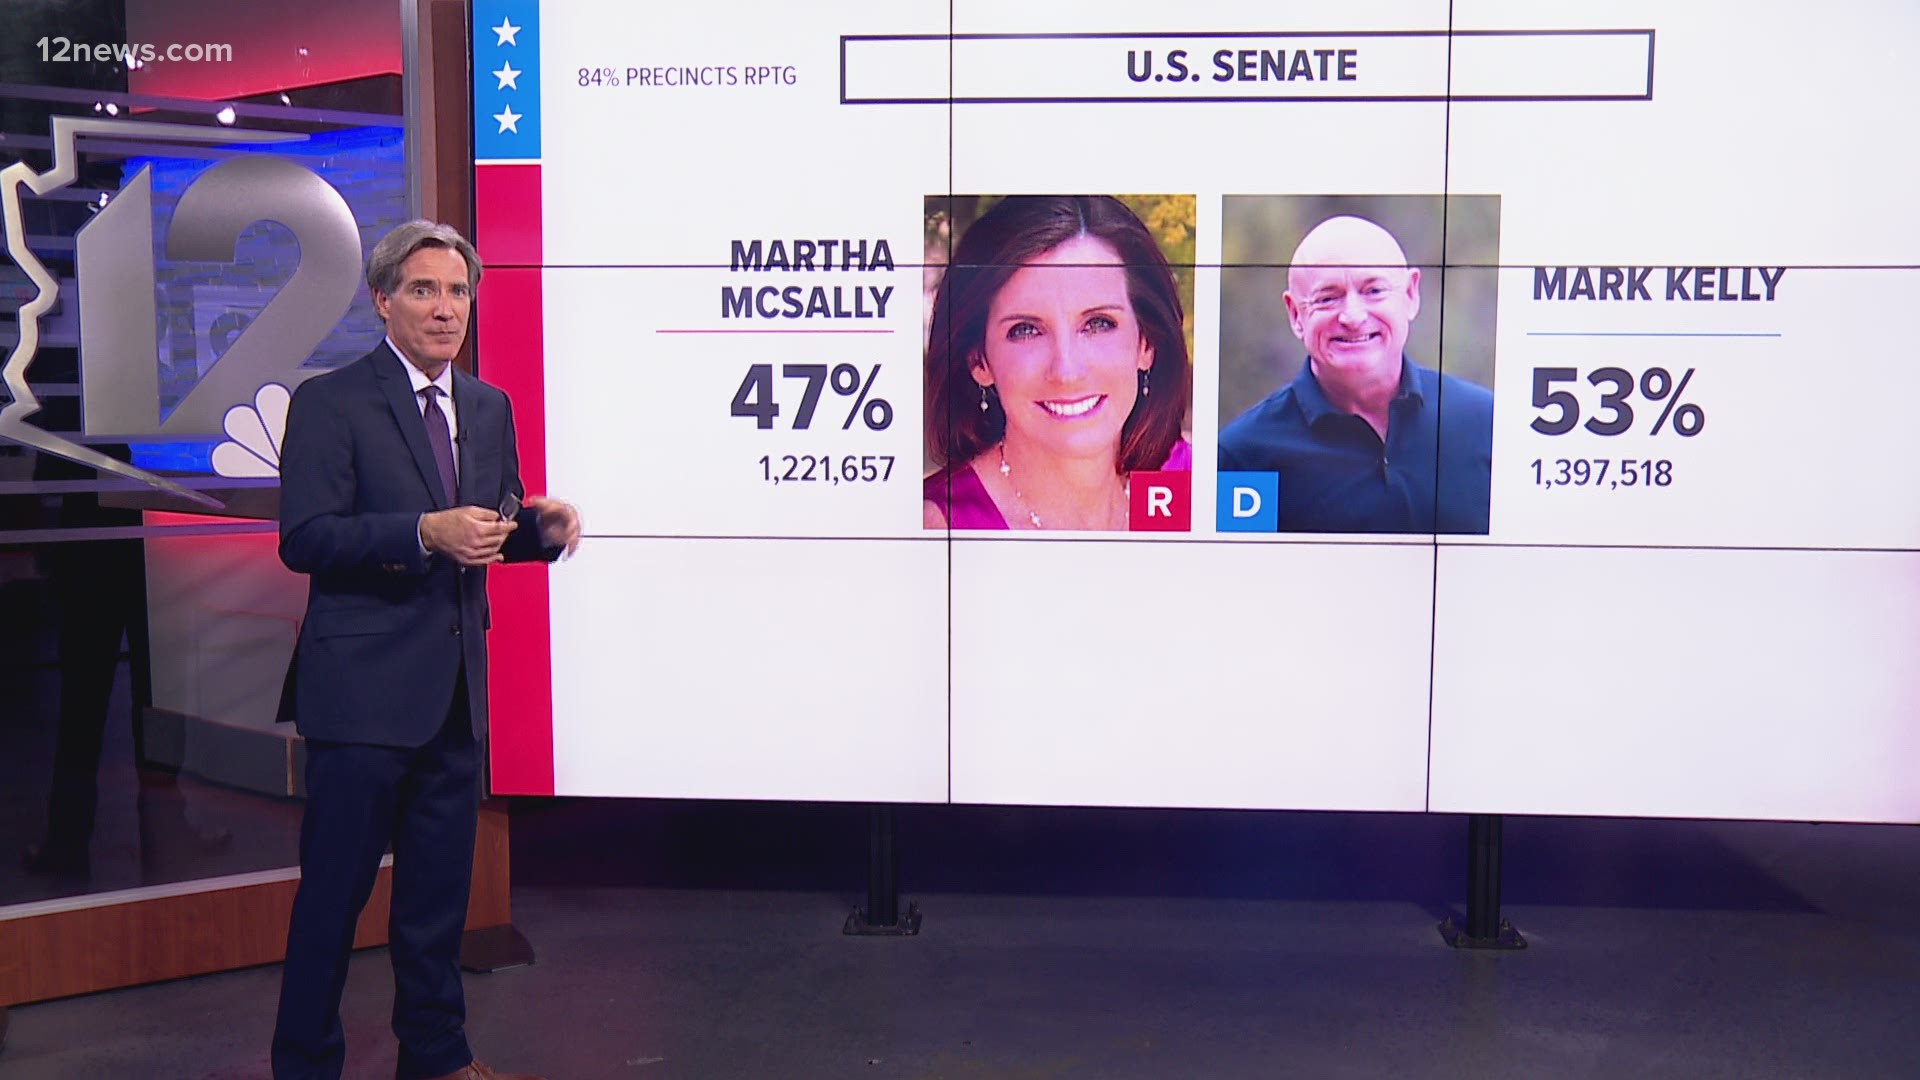 As of early Wednesday morning, Mark Kelly led Martha McSally in the race for U.S. Senate. It was one of the most expensive campaigns in the country.